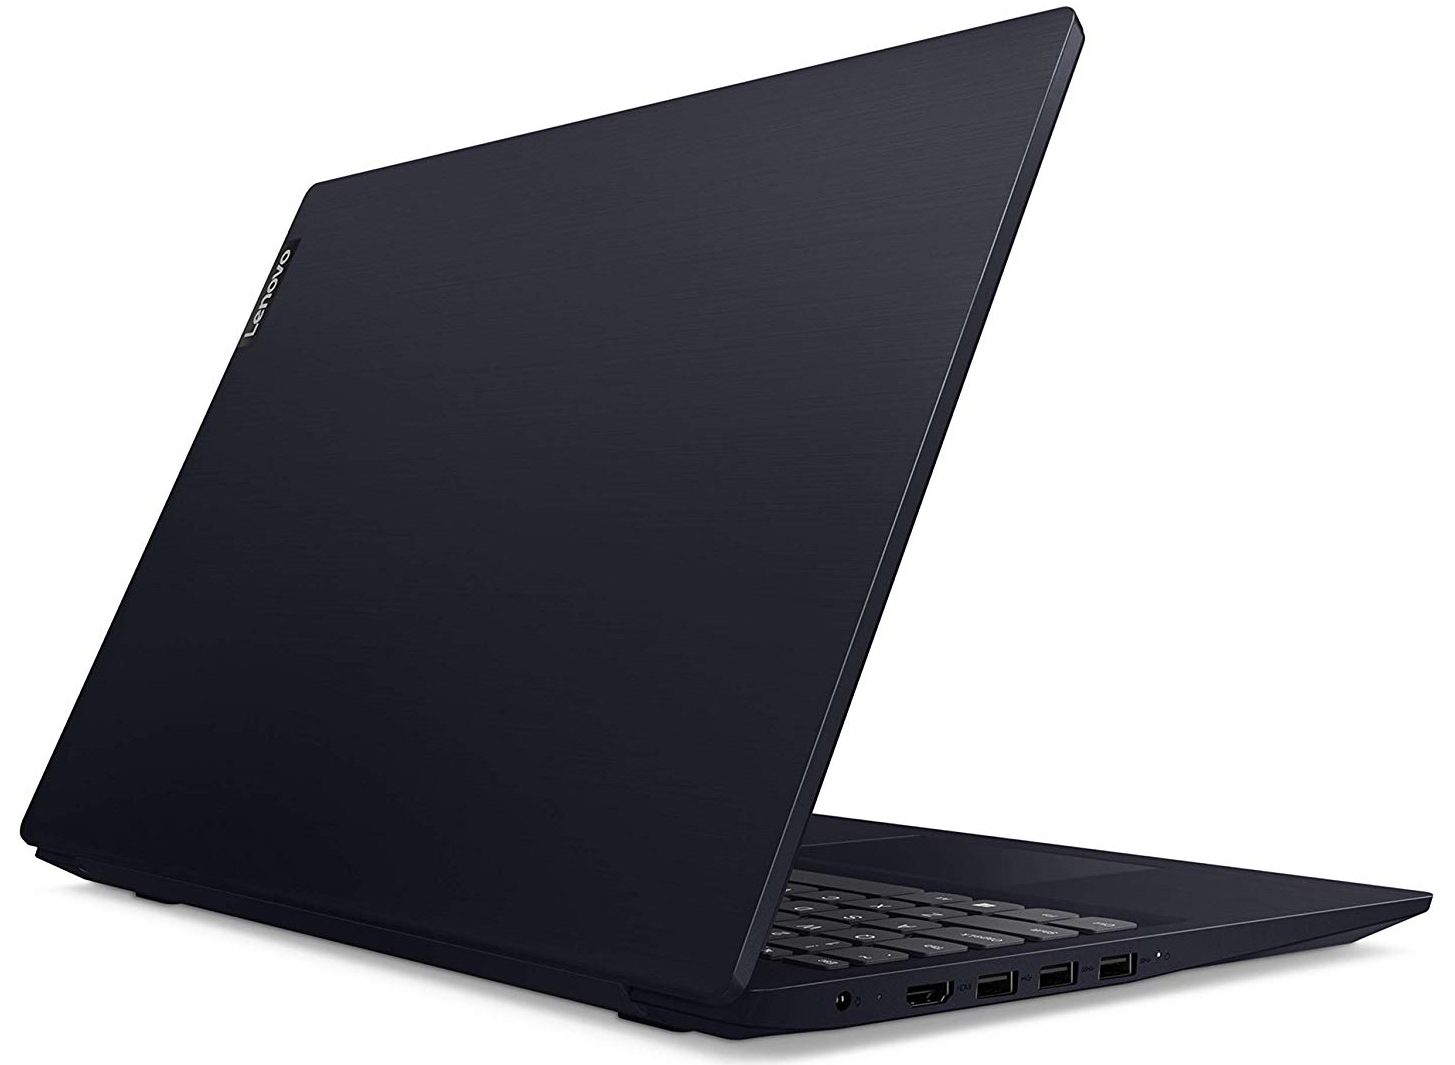 Lenovo Ideapad S145 15 review - budget multimedia device with a modern look  